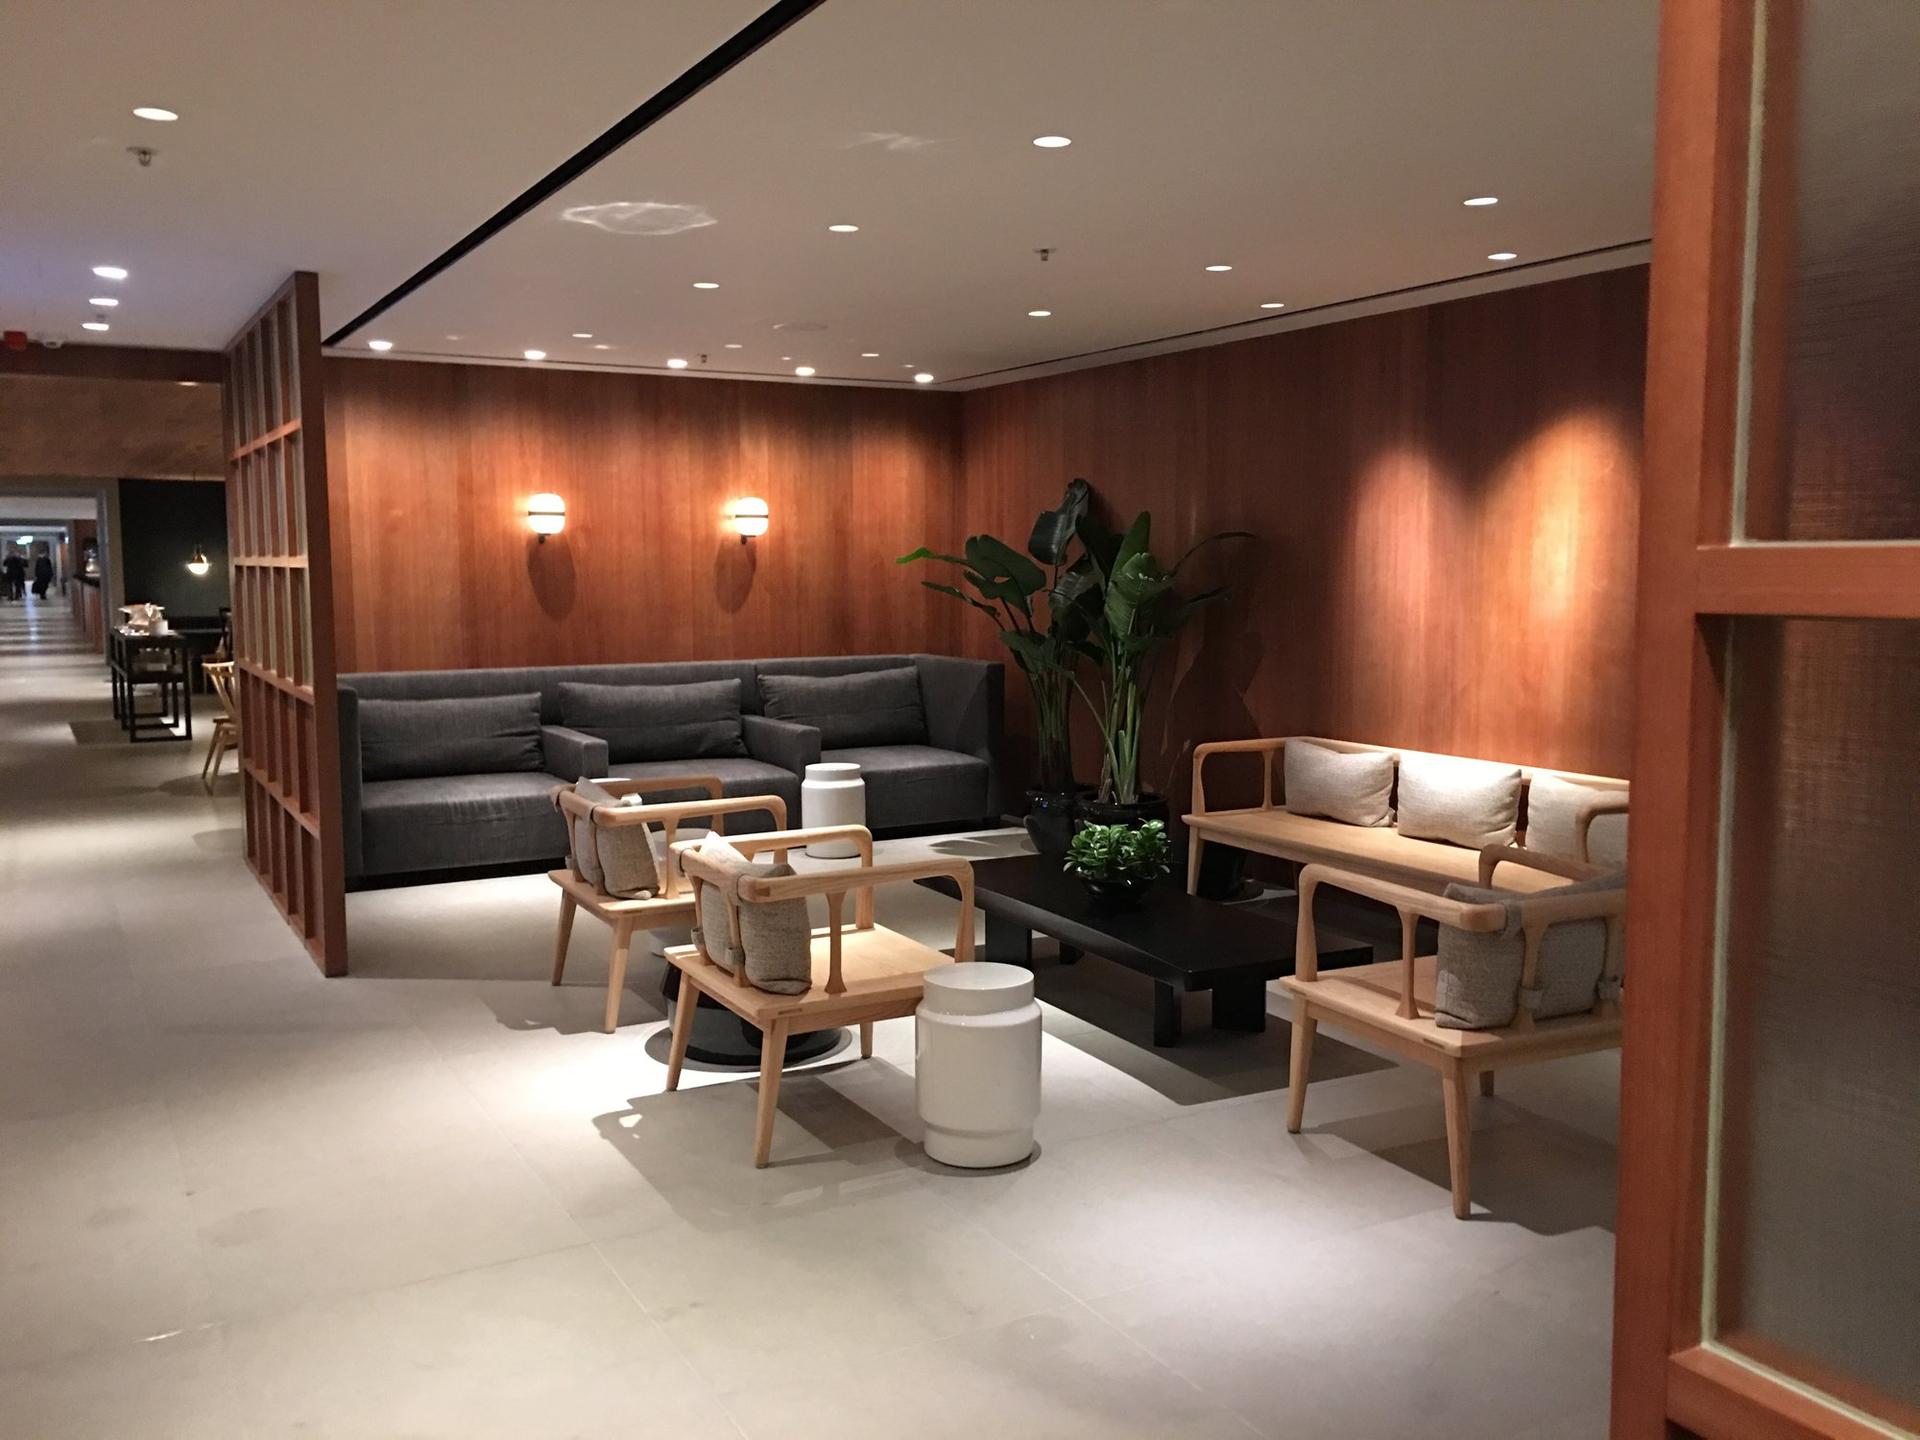 Cathay Pacific The Pier Business Class Lounge image 34 of 61